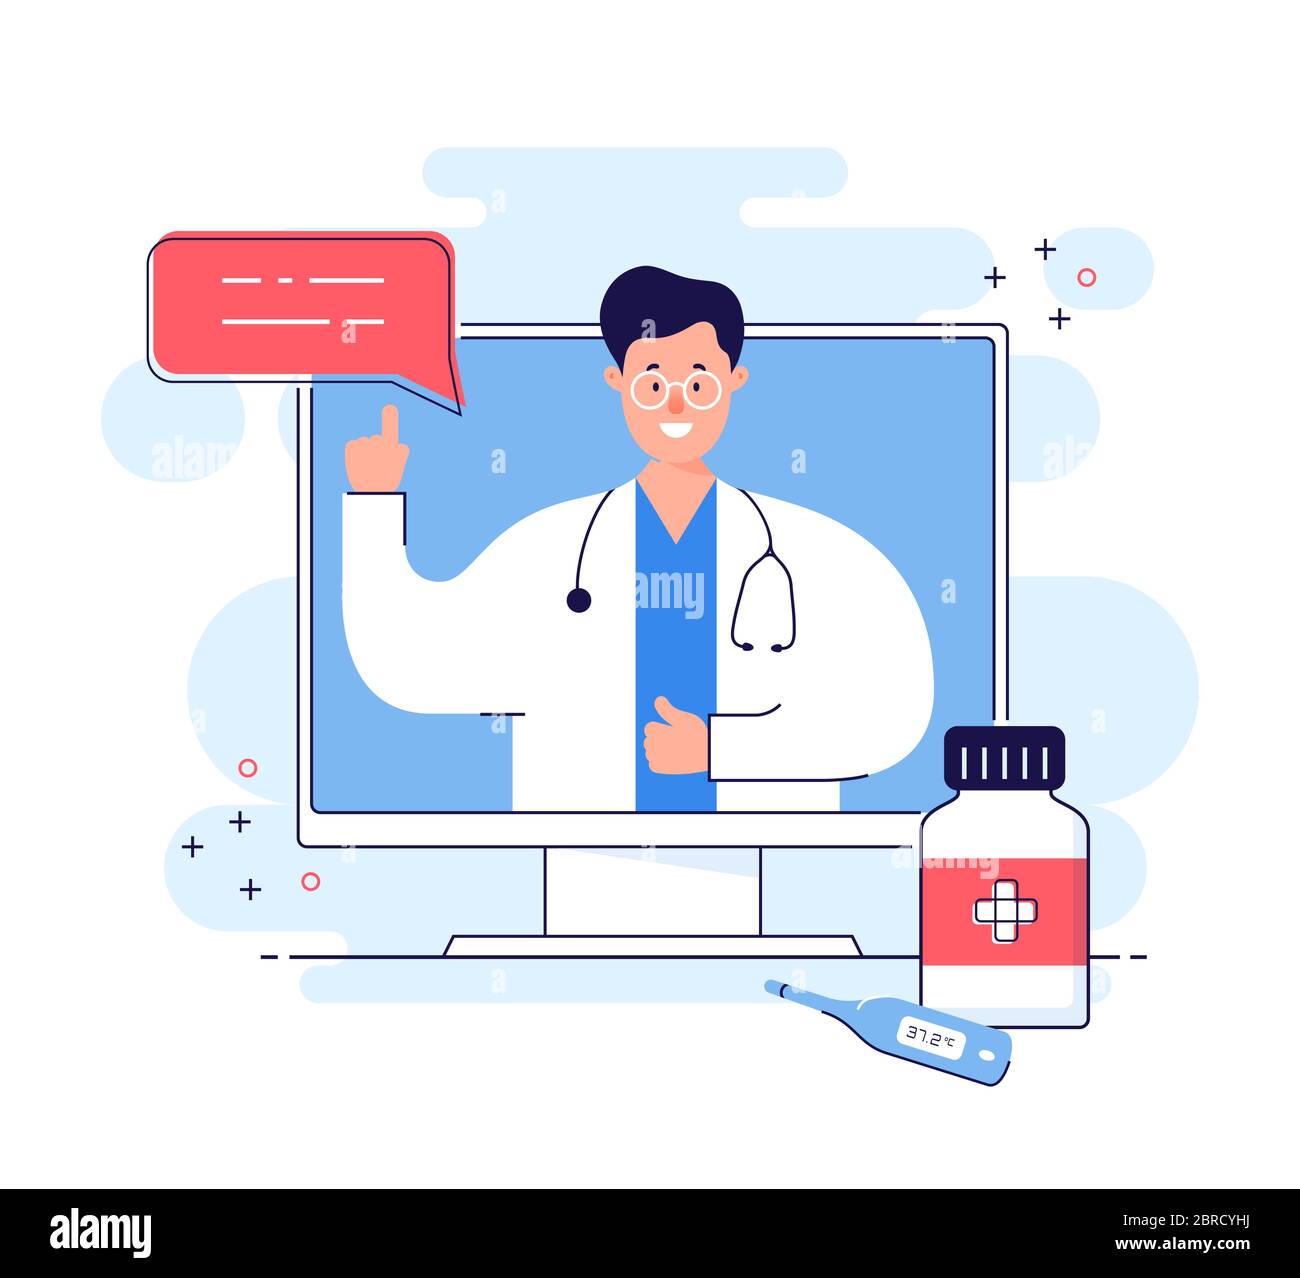 Online consultation with doctor remote. Medical internet service for distant support or health care. Telemedicine concept isolated on white background Stock Vector